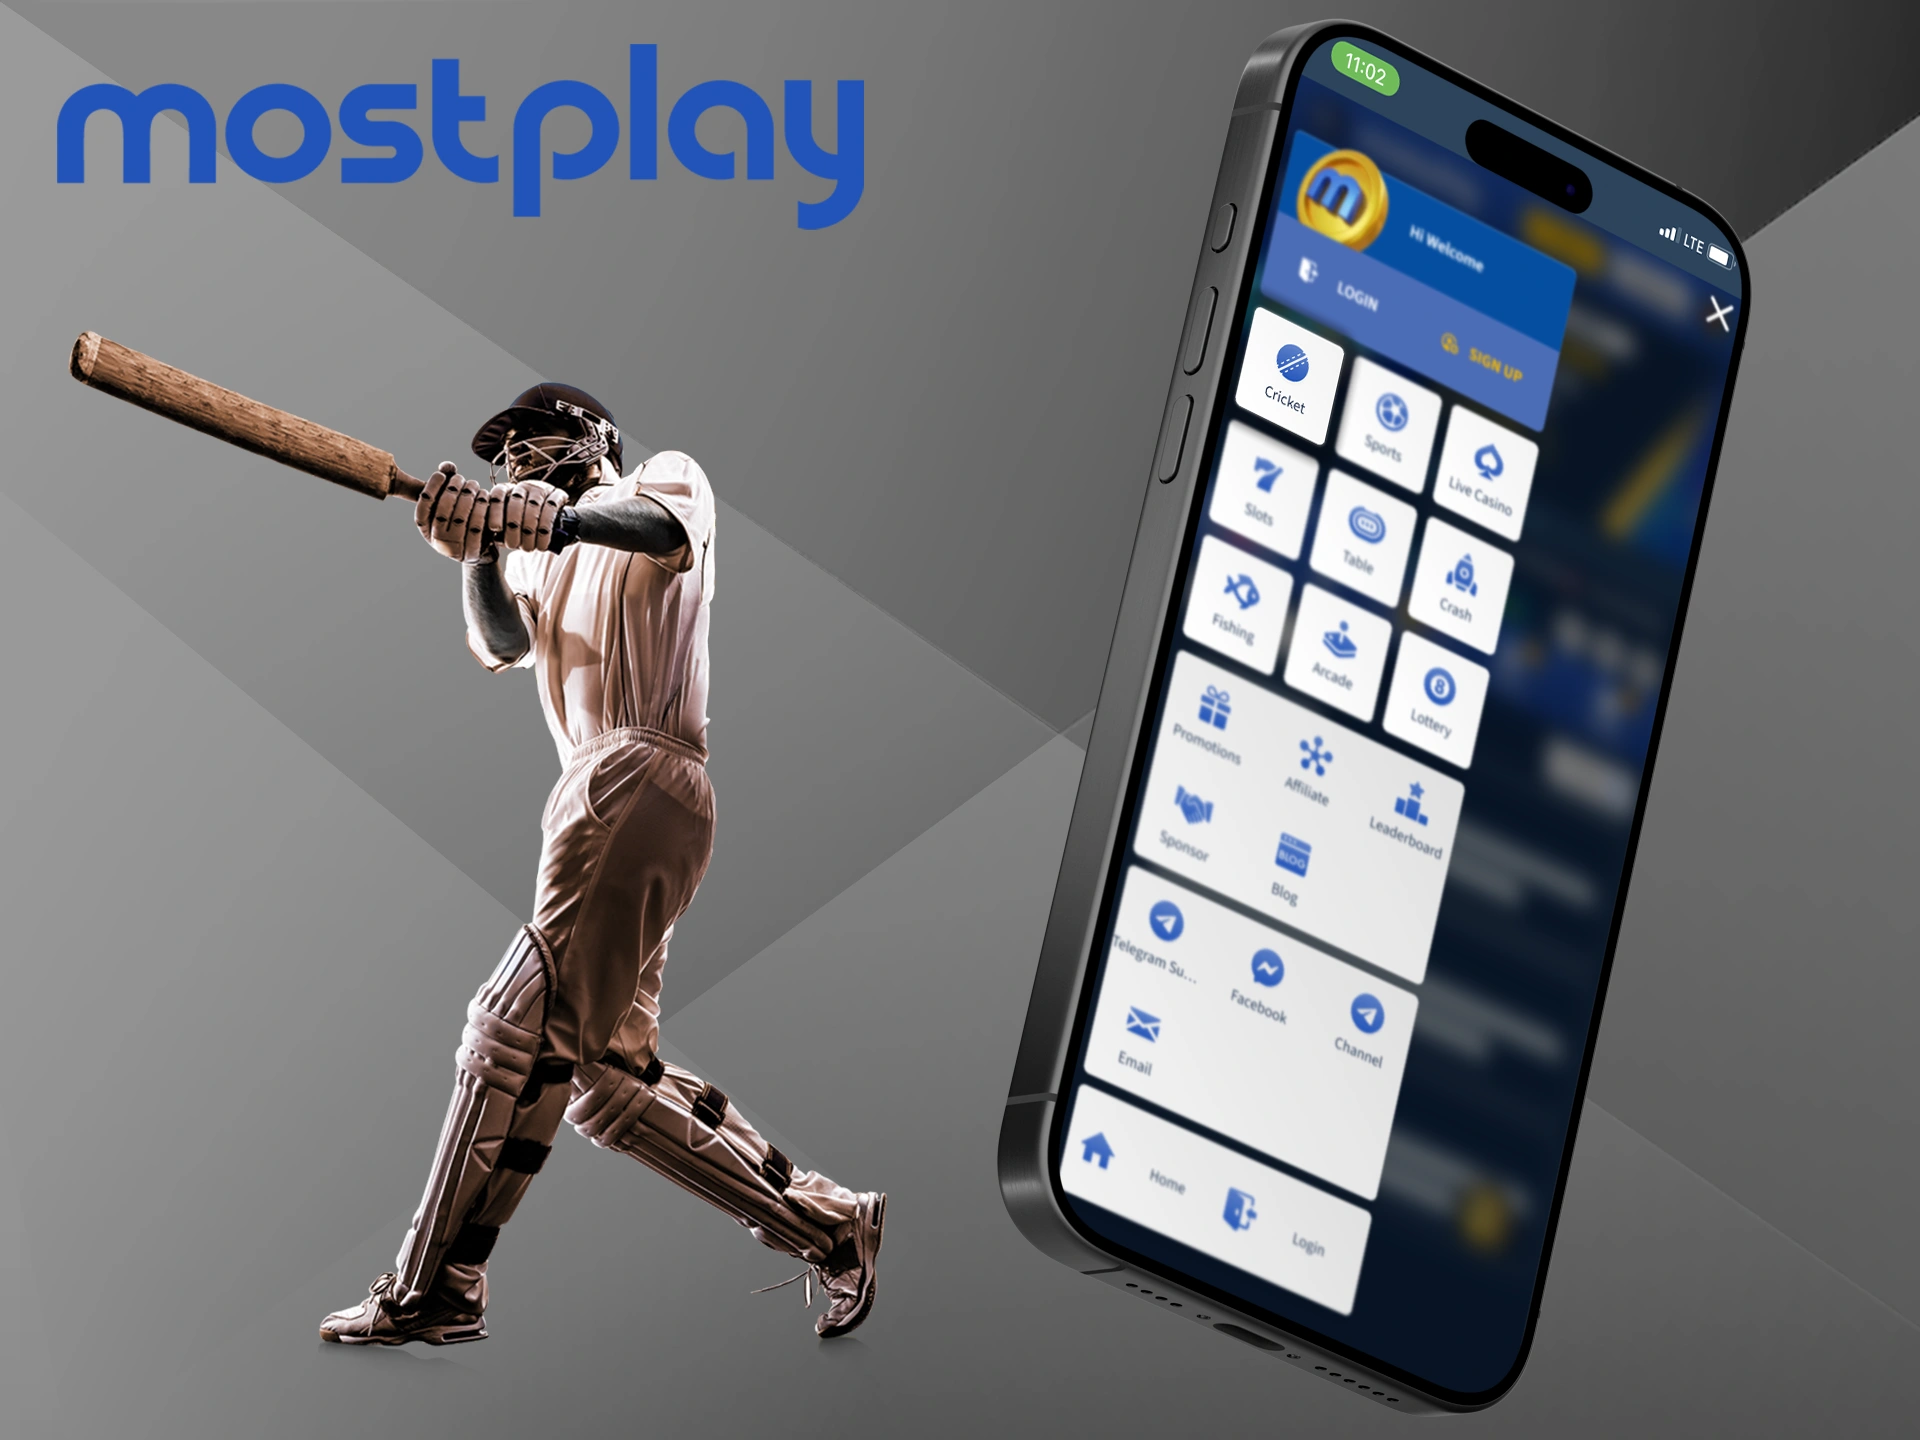 Become a part of Mostplay and win money from cricket betting.